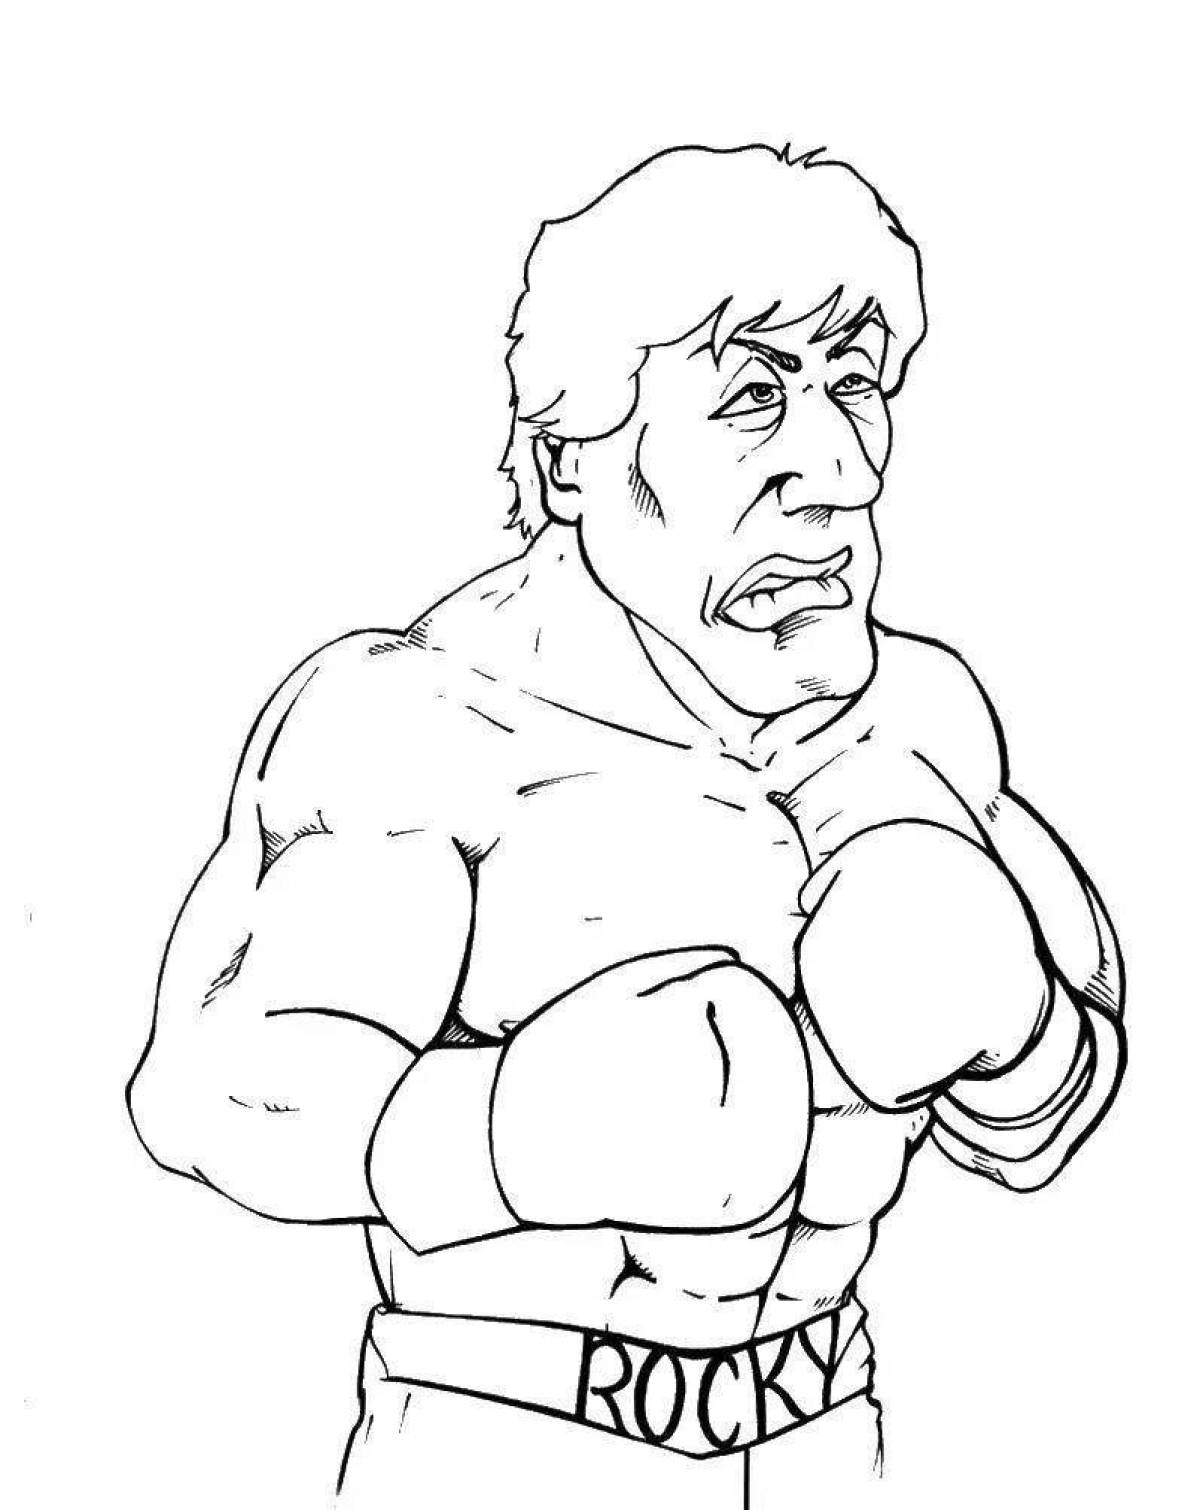 Boxer live coloring page